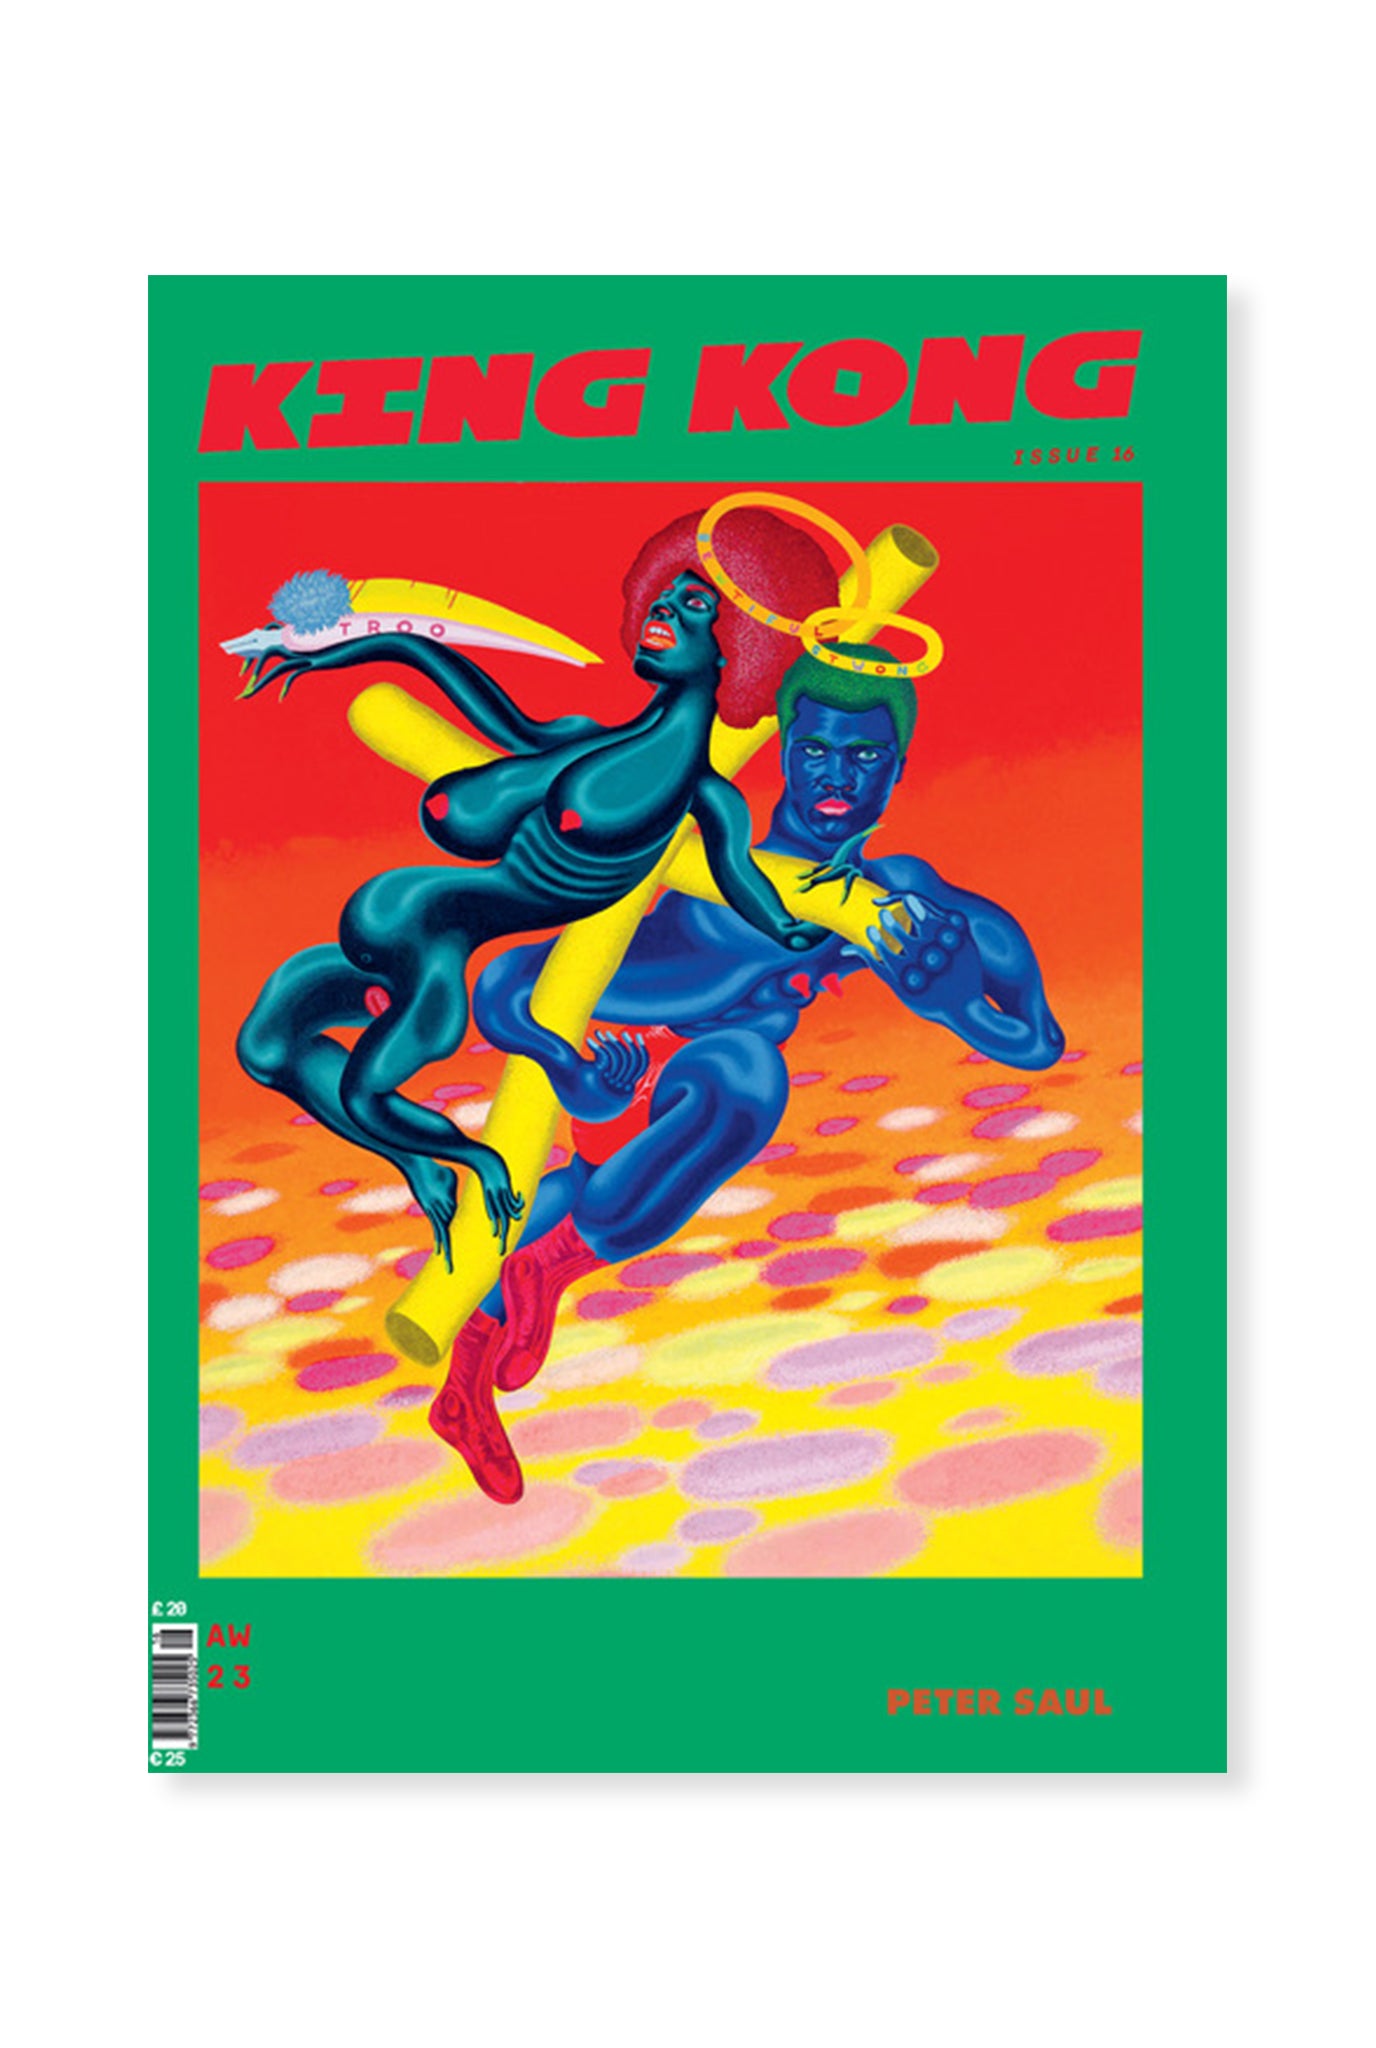 King Kong, Issue 16